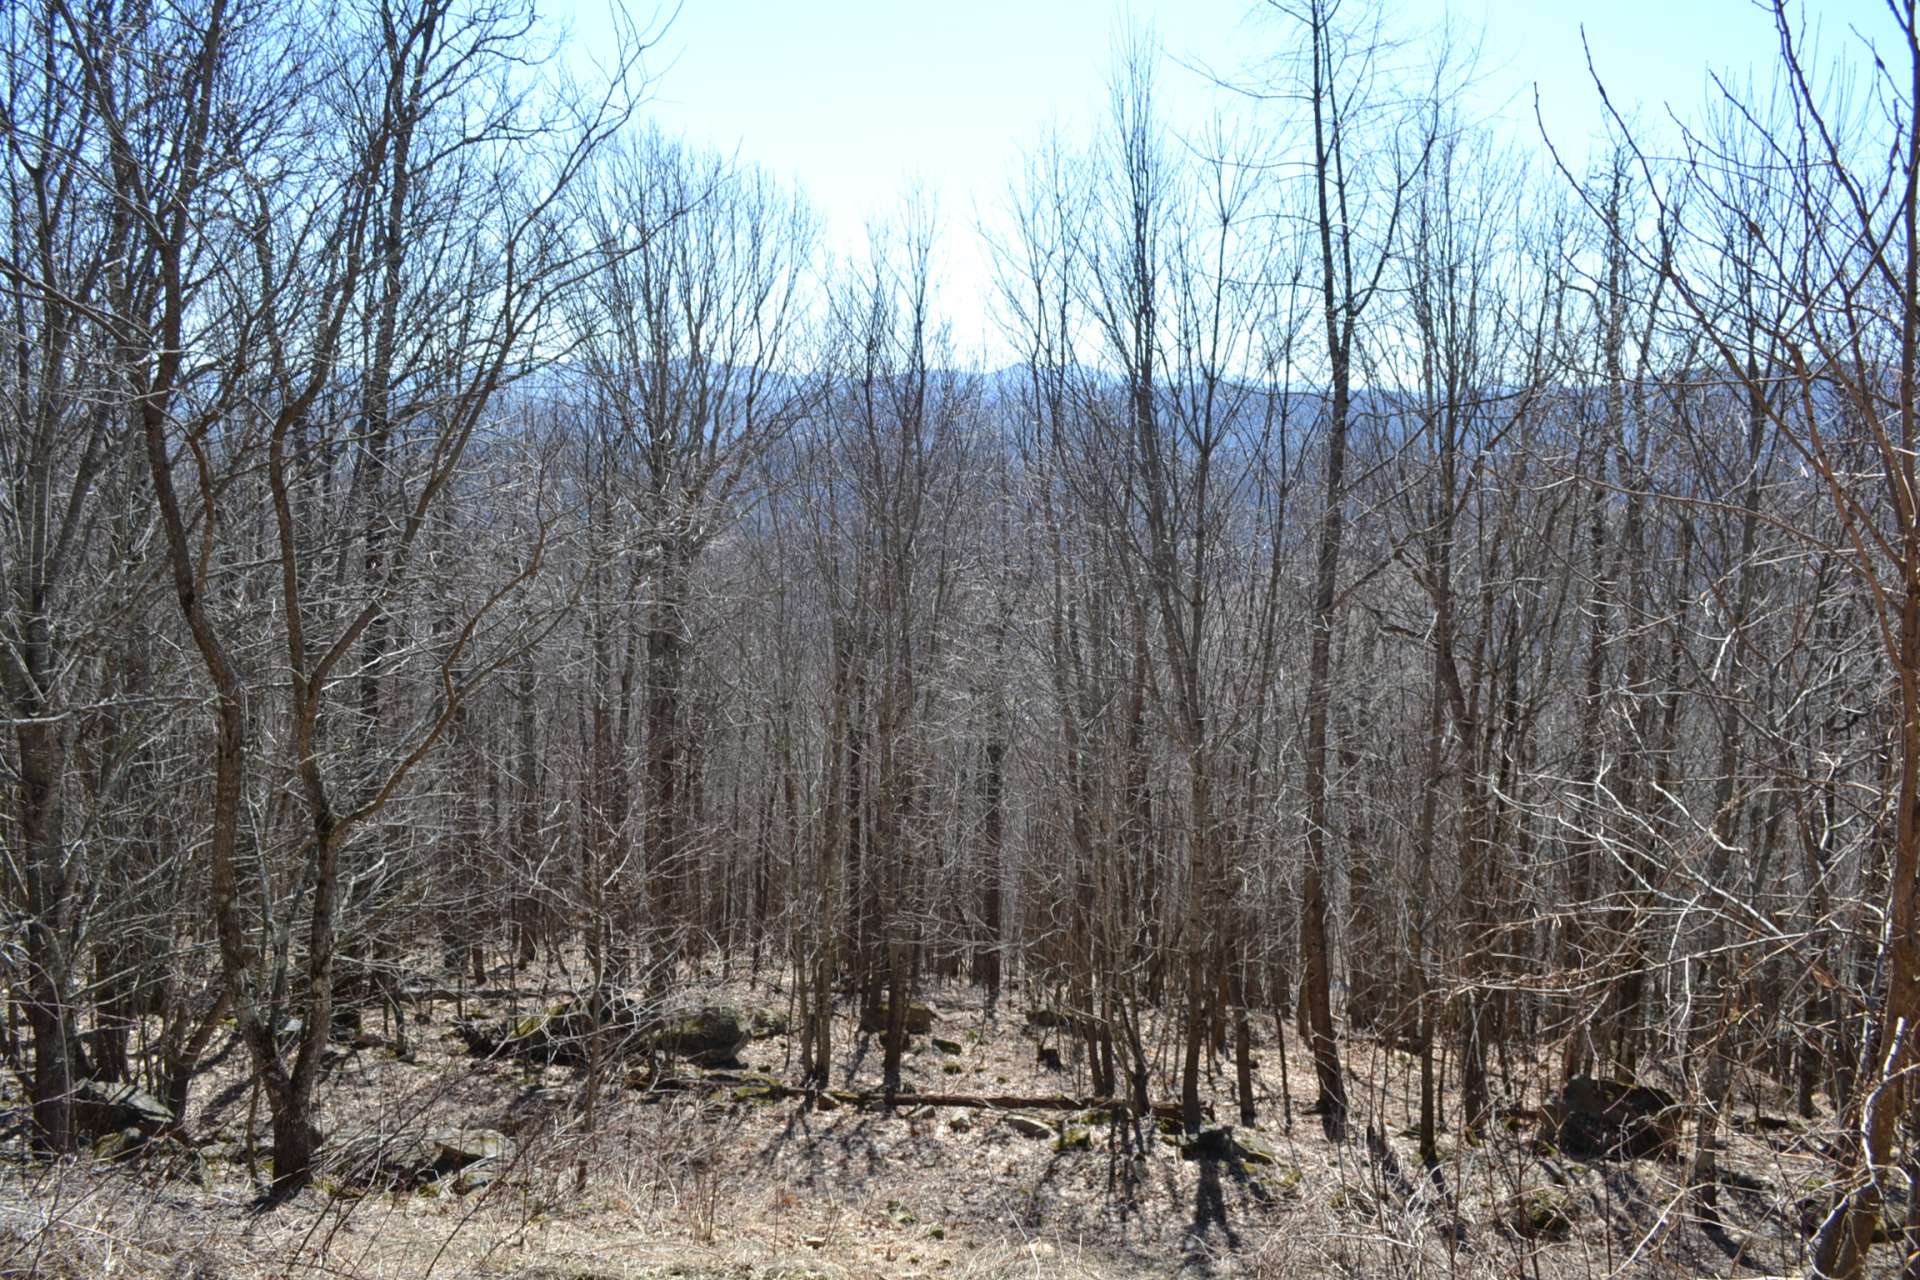 Lot 7 is a 2.67 acre mountain home site offering potential views with the tree removal or trimming.